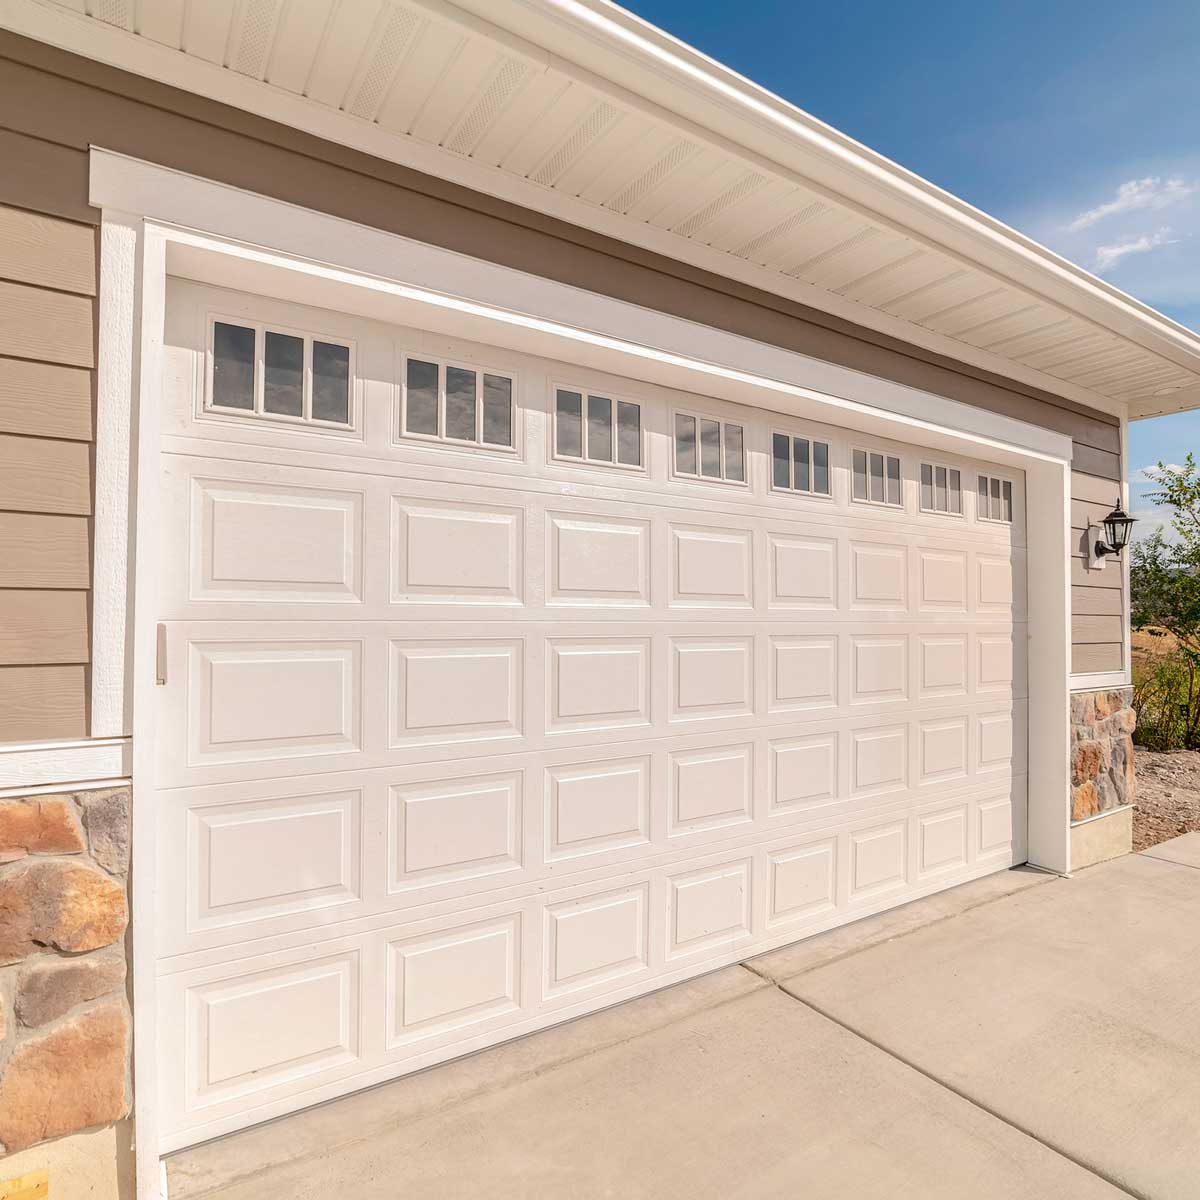 Converting A Garage Into Living Space, How To Add A Room Above Your Garage